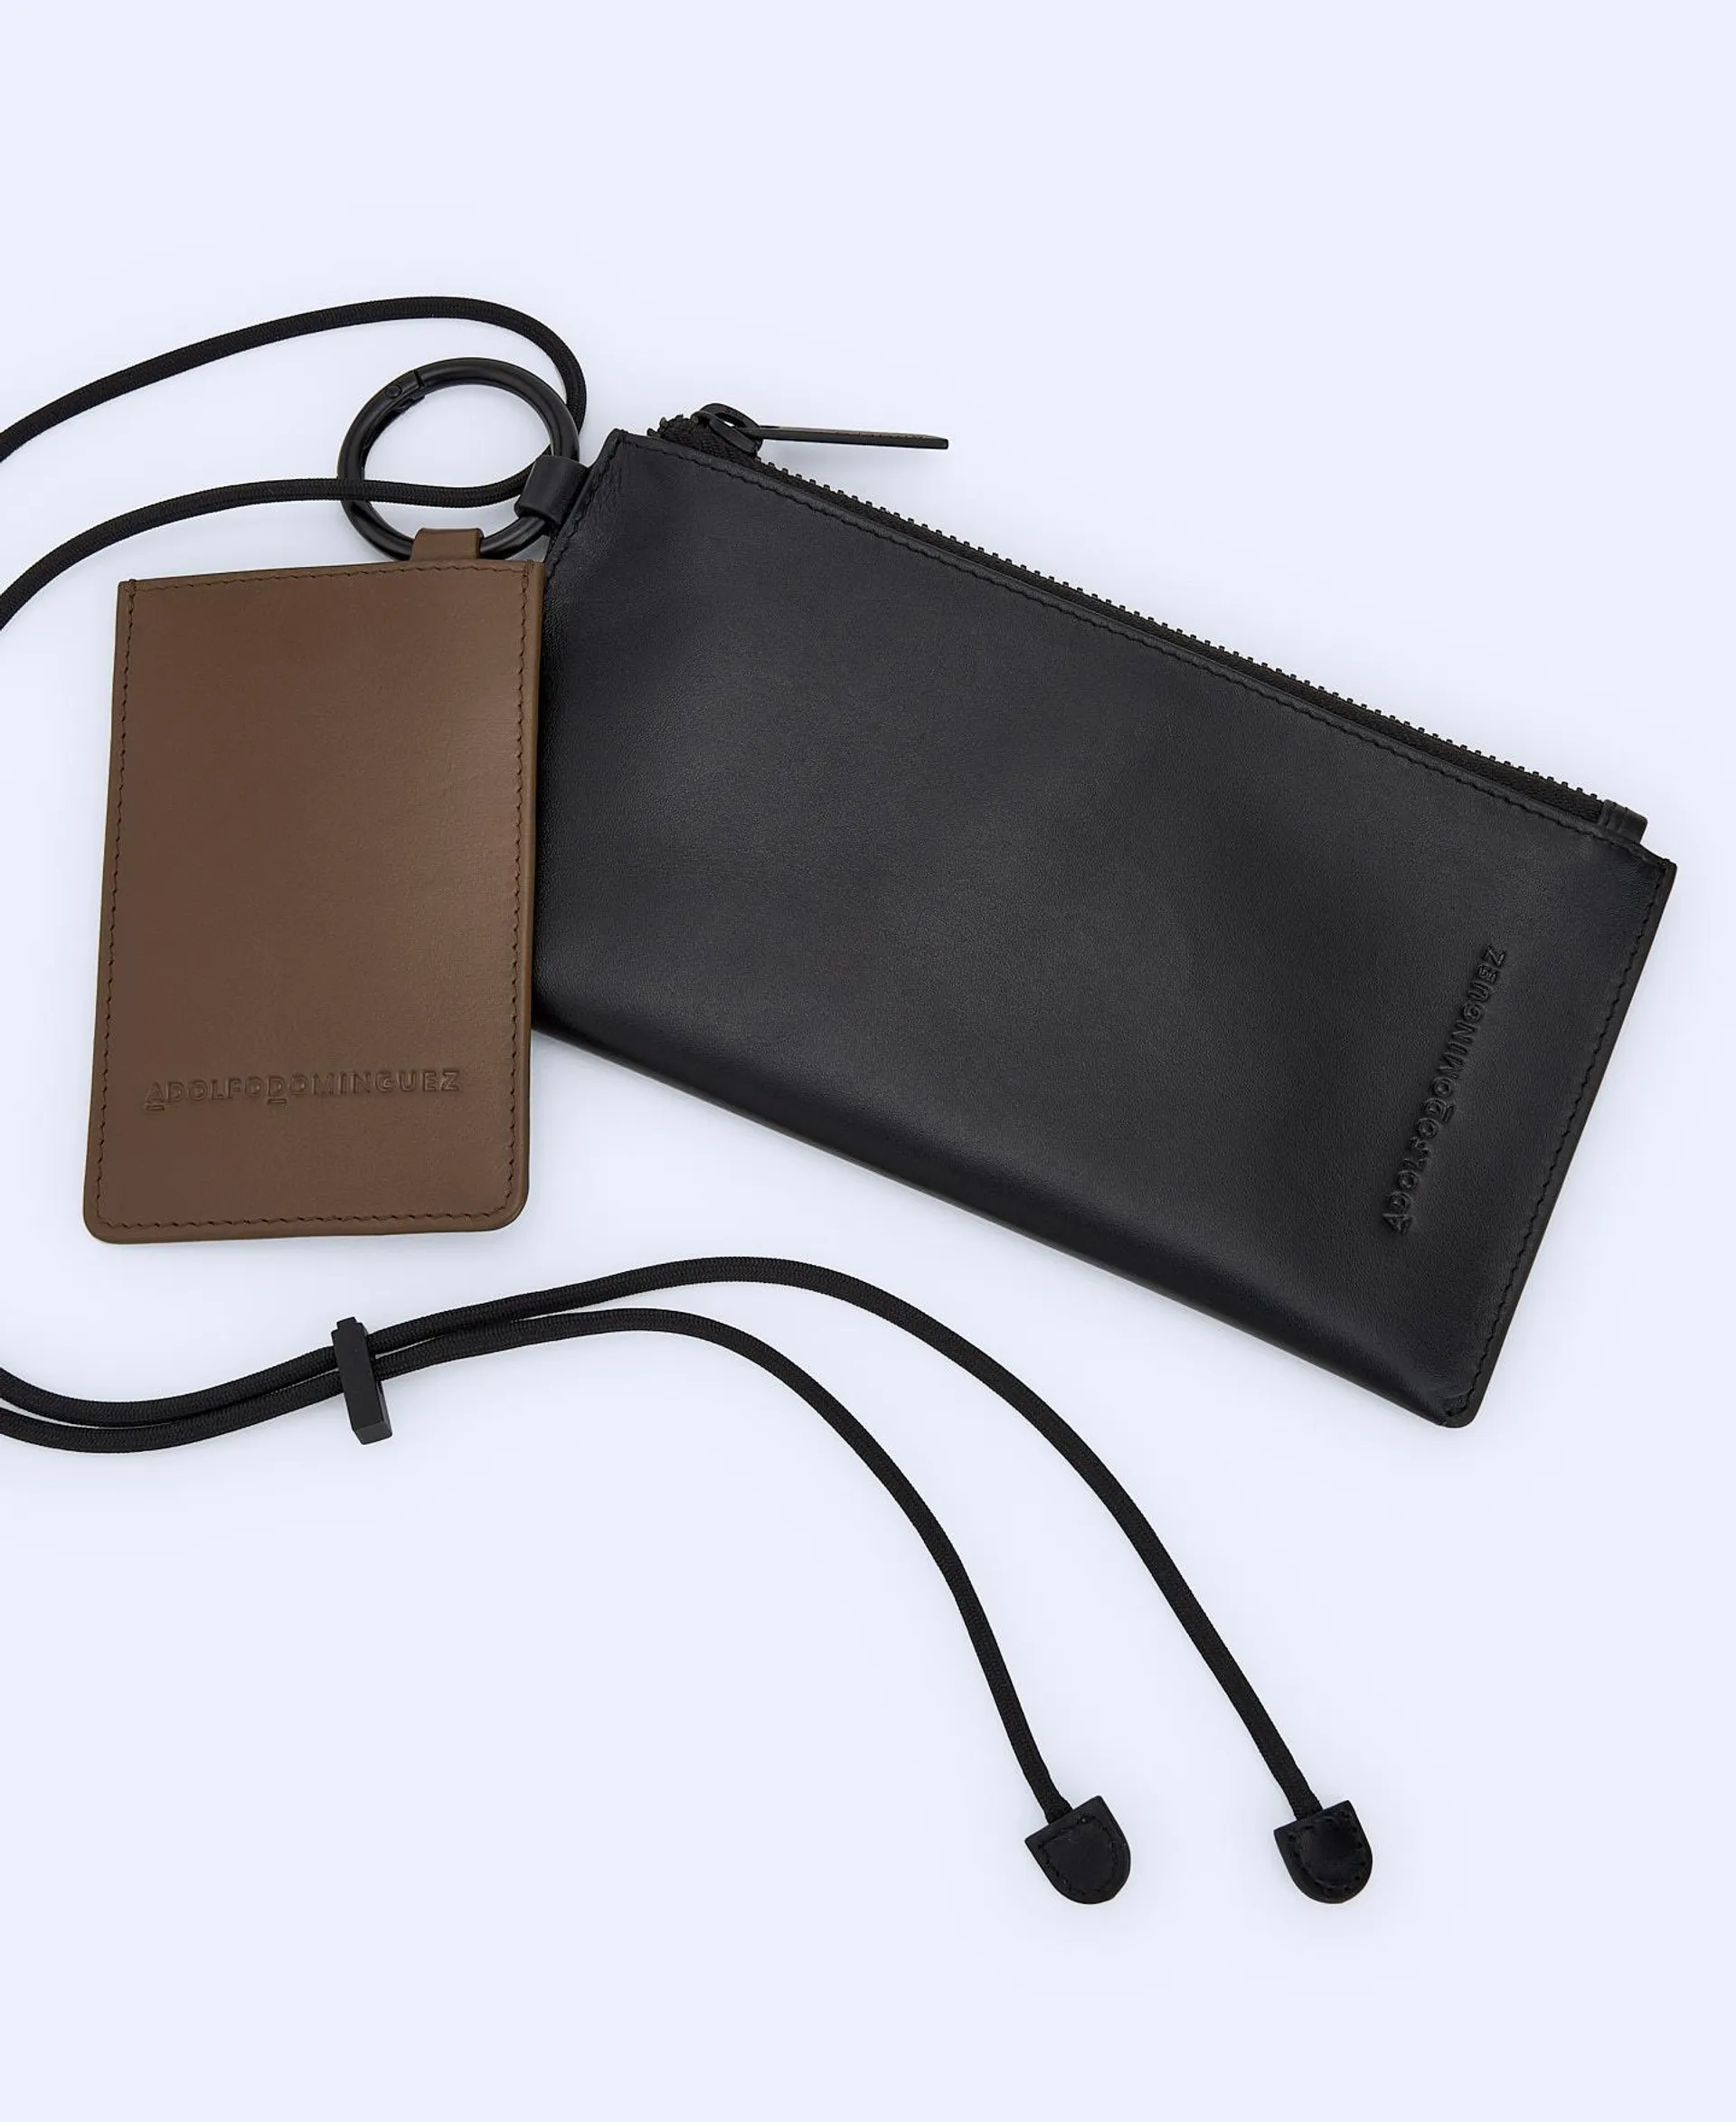 Responsible leather mobile phone wallet